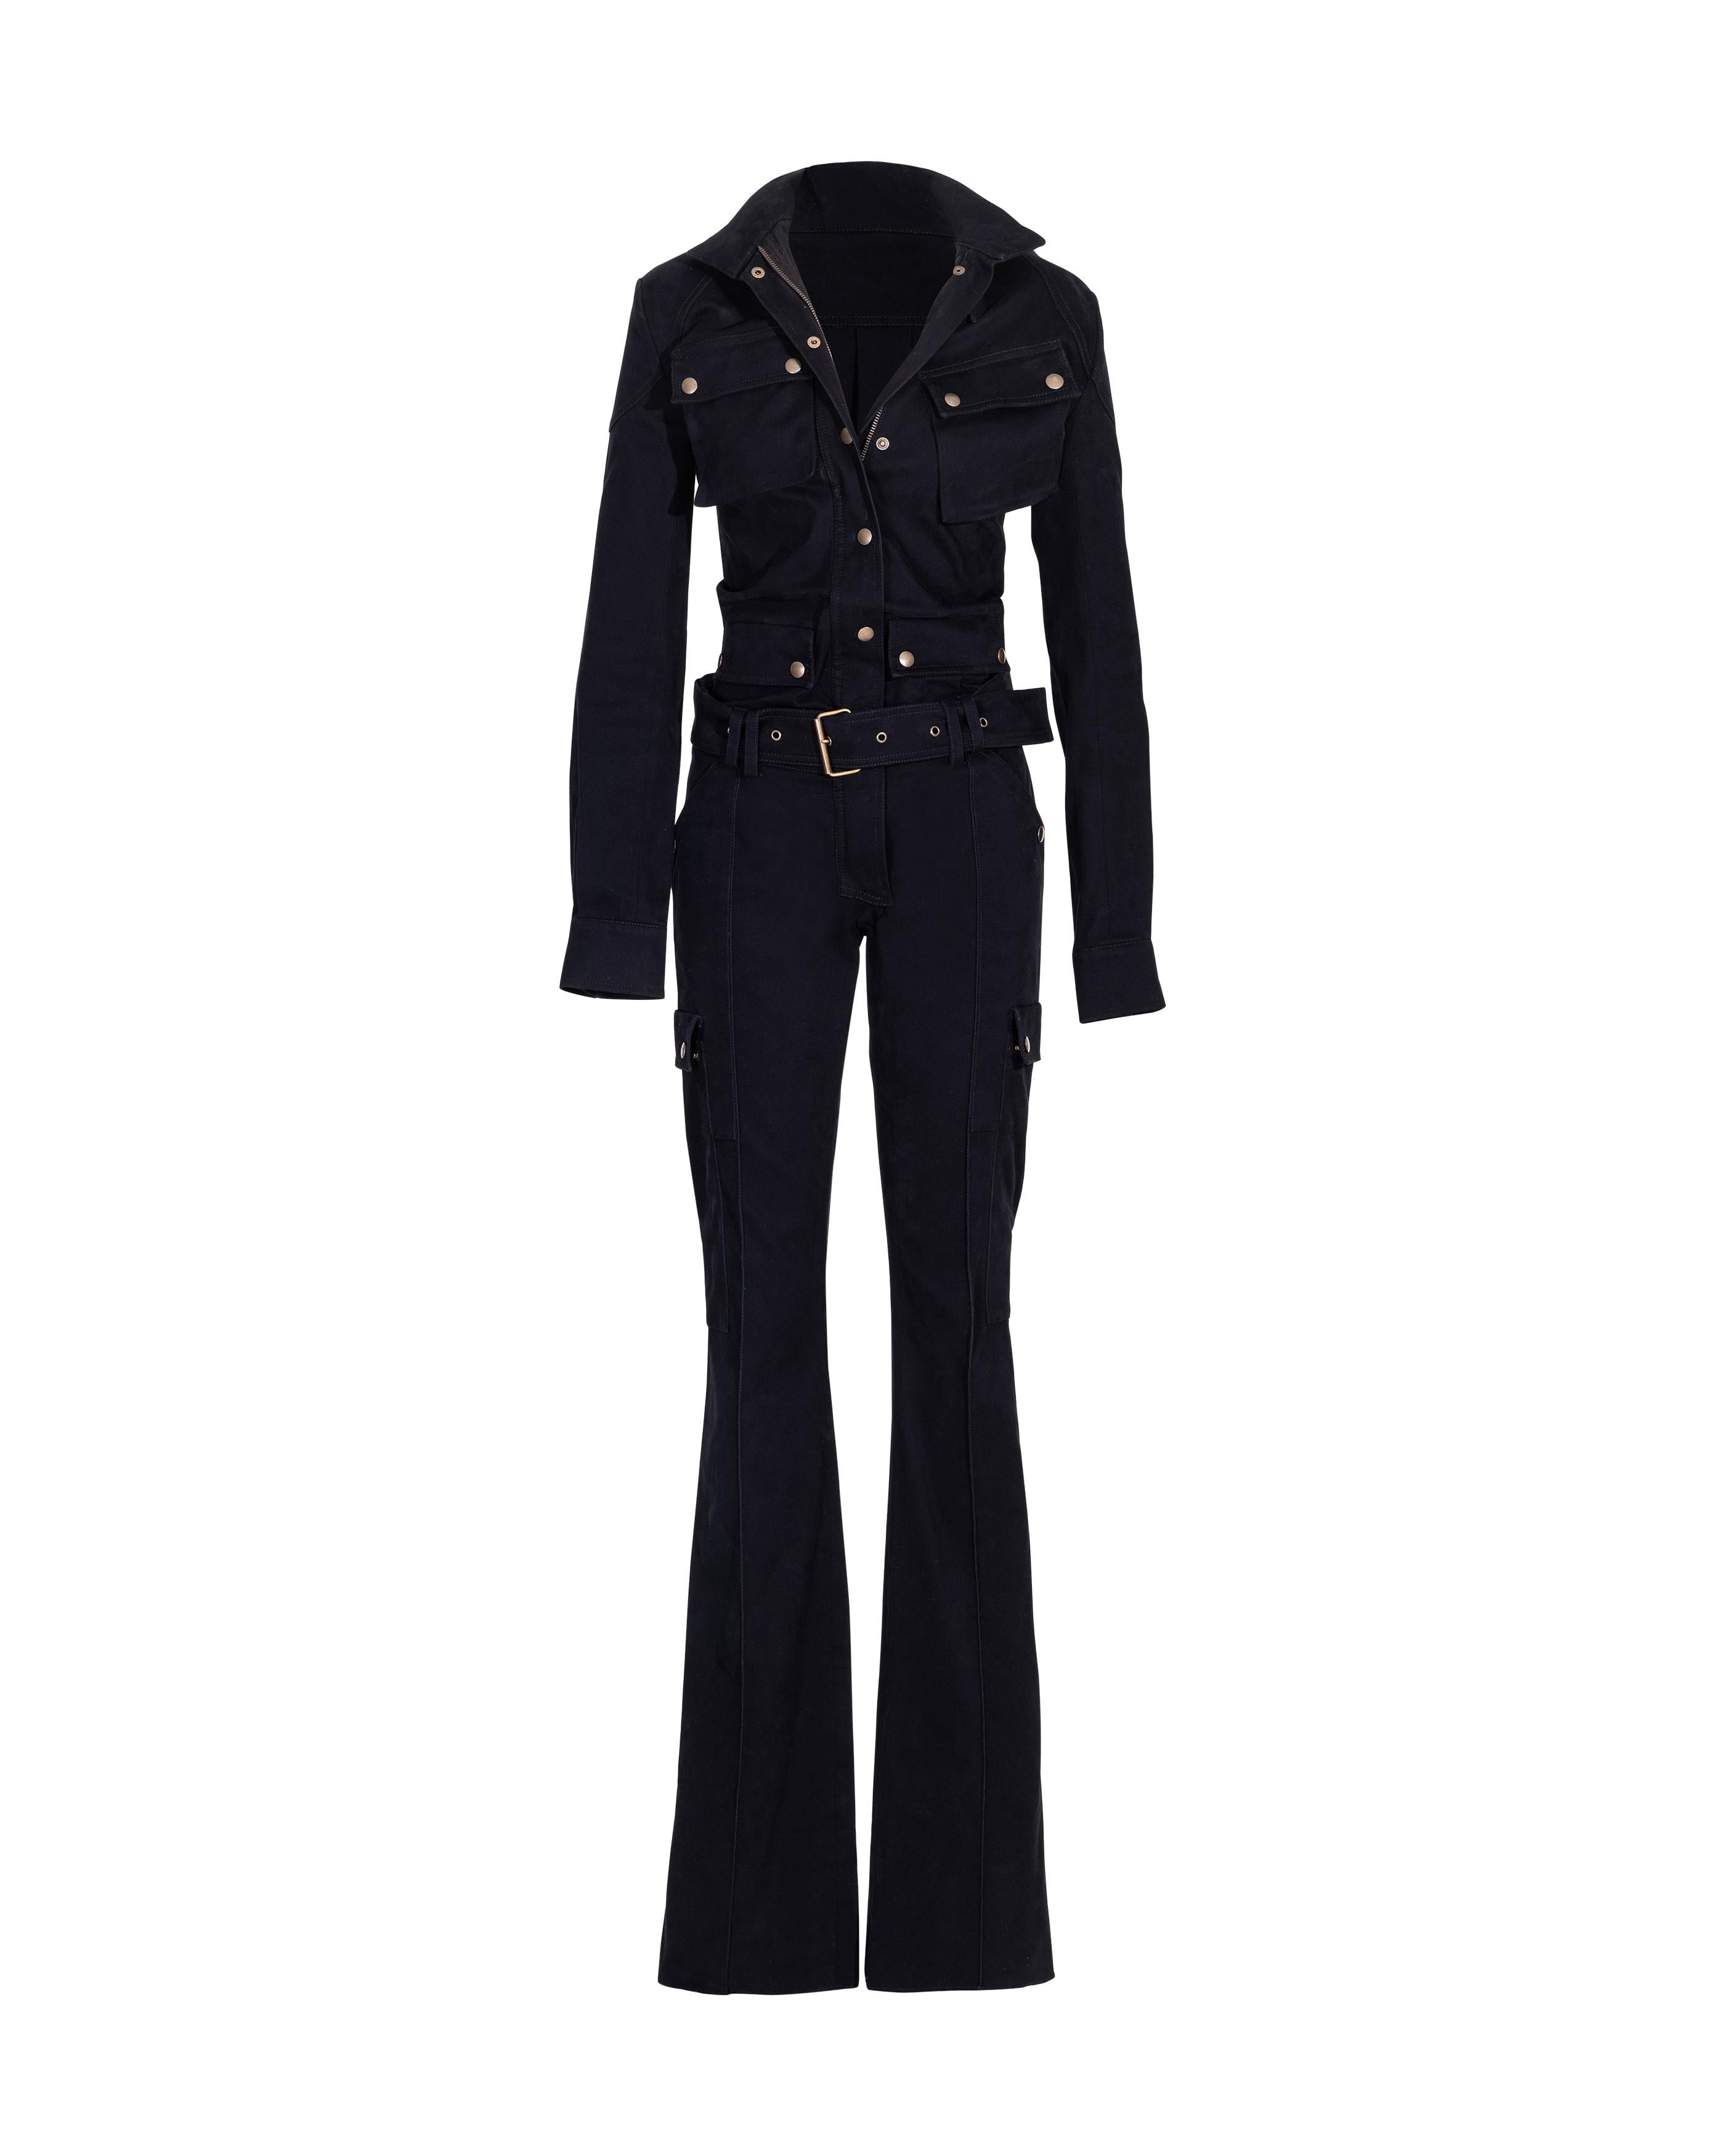 A/W 2001 Balenciaga by Nicolas Ghesquiere Black Jumpsuit with Bronze Hardware 5